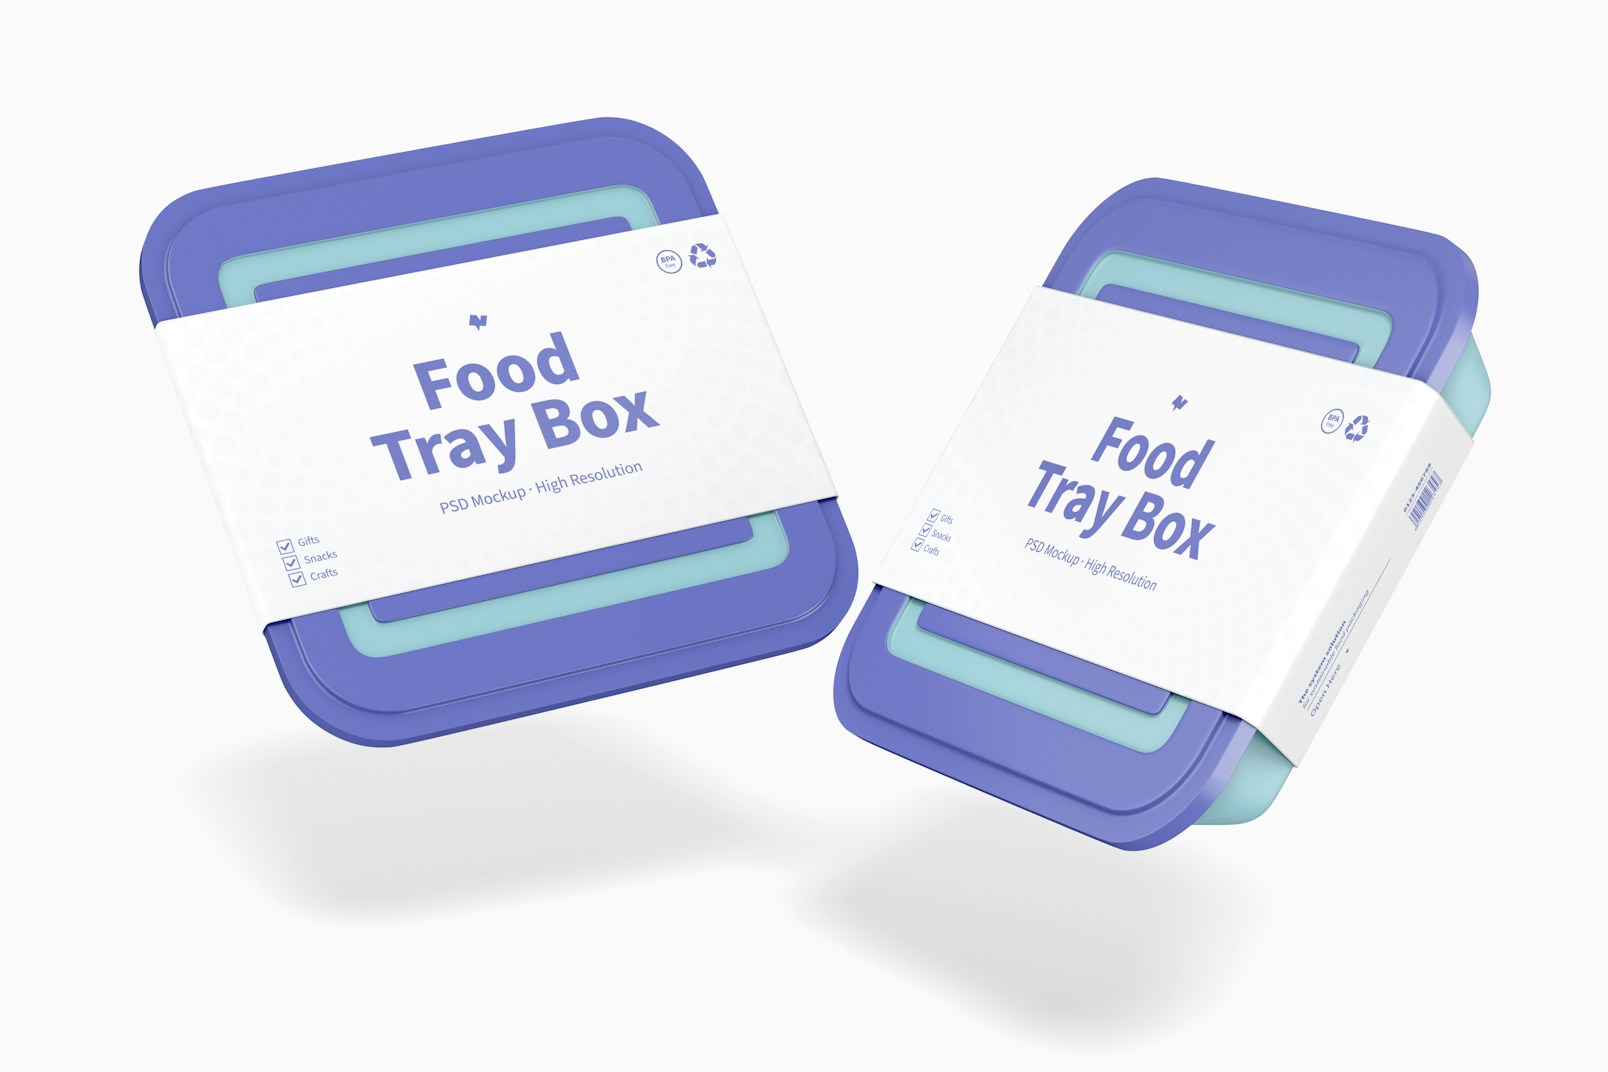 Food Tray Boxes with Lid Mockup, Floating